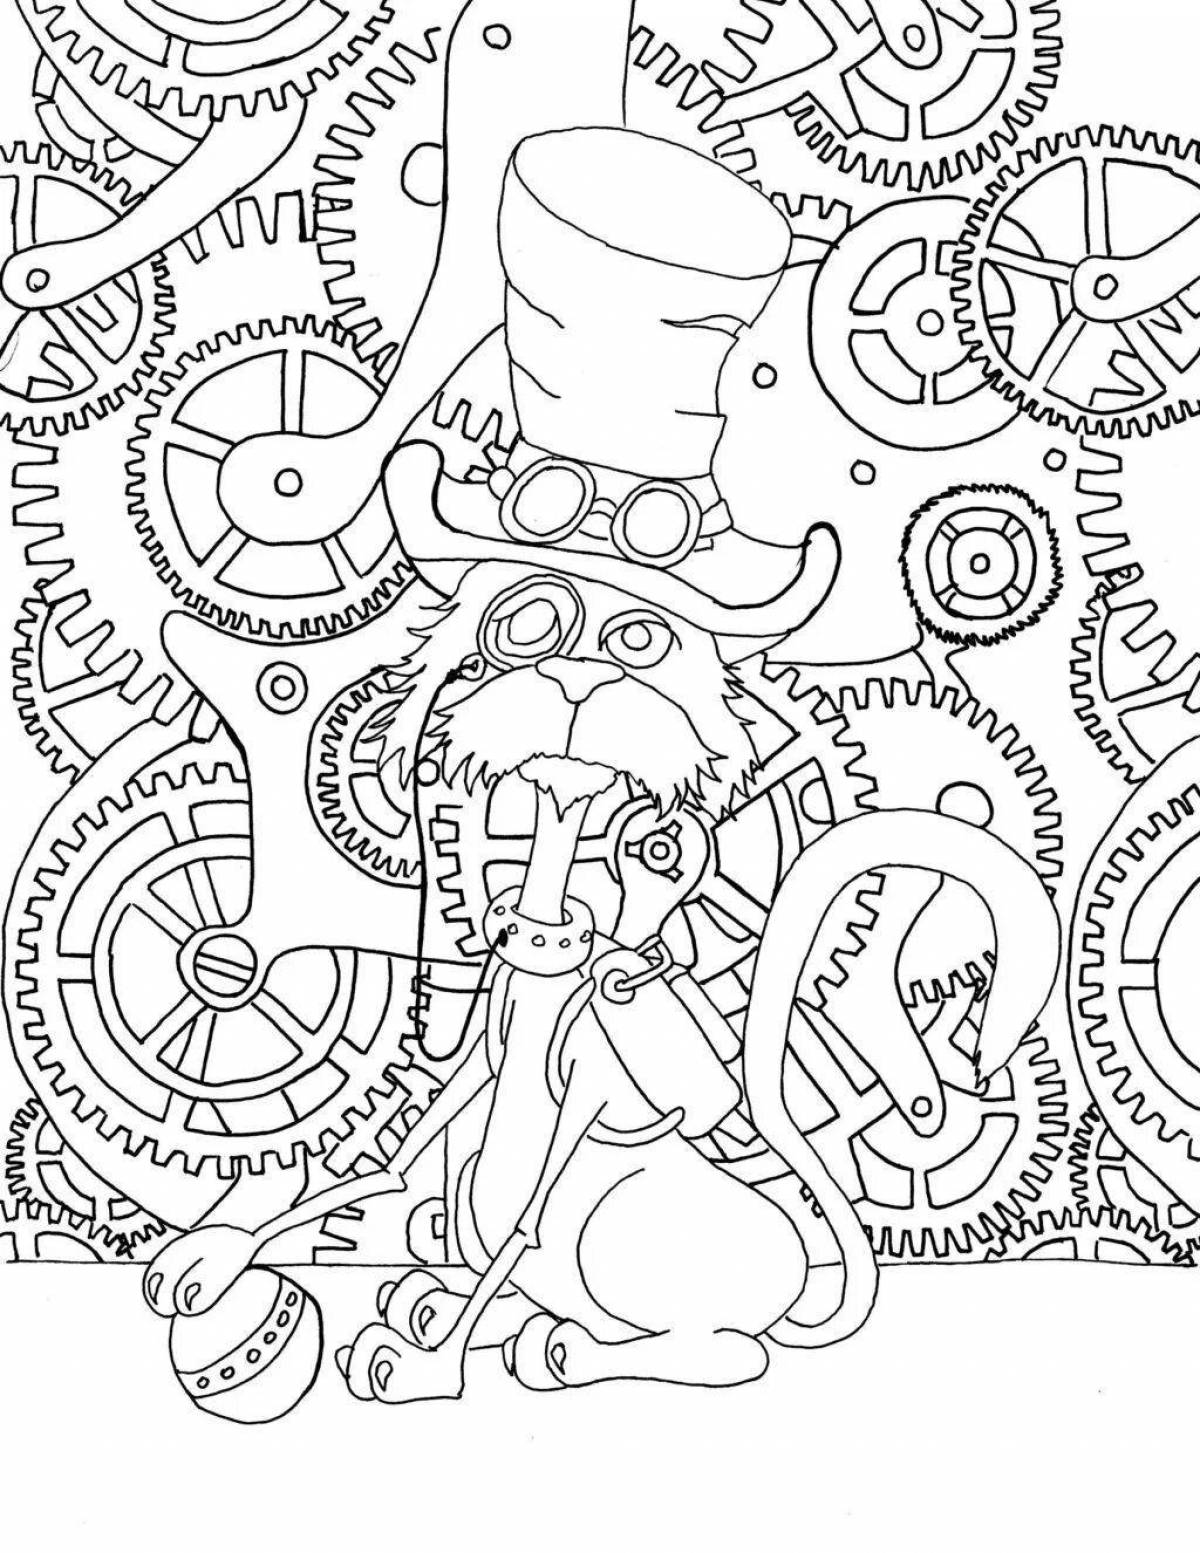 Great steampunk coloring book